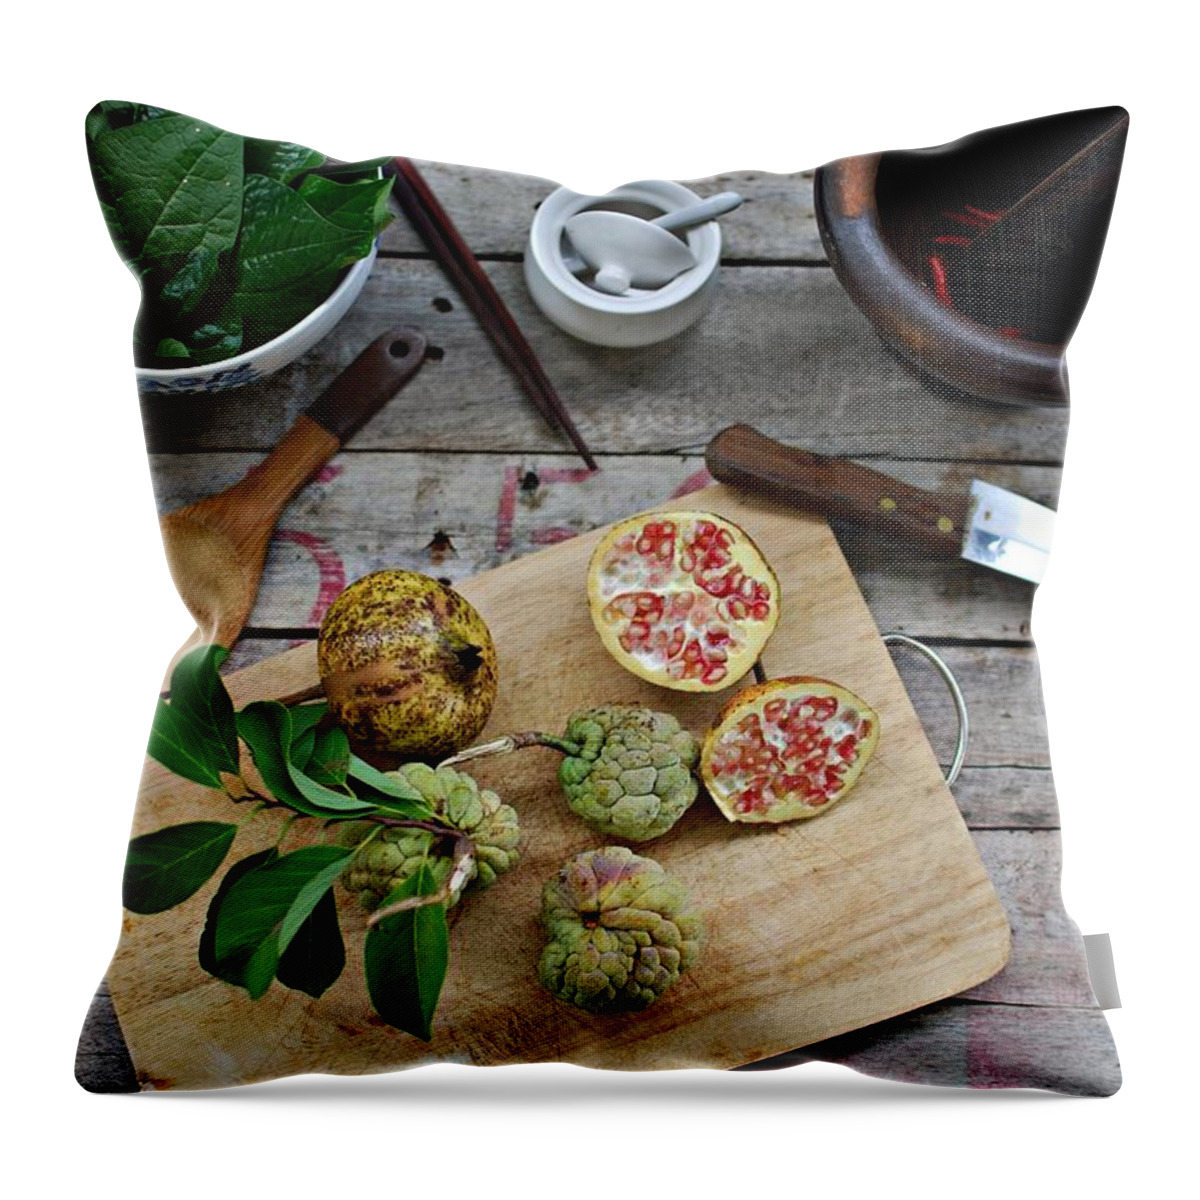 Cutting Board Throw Pillow featuring the photograph Vegetables by Hoaixh